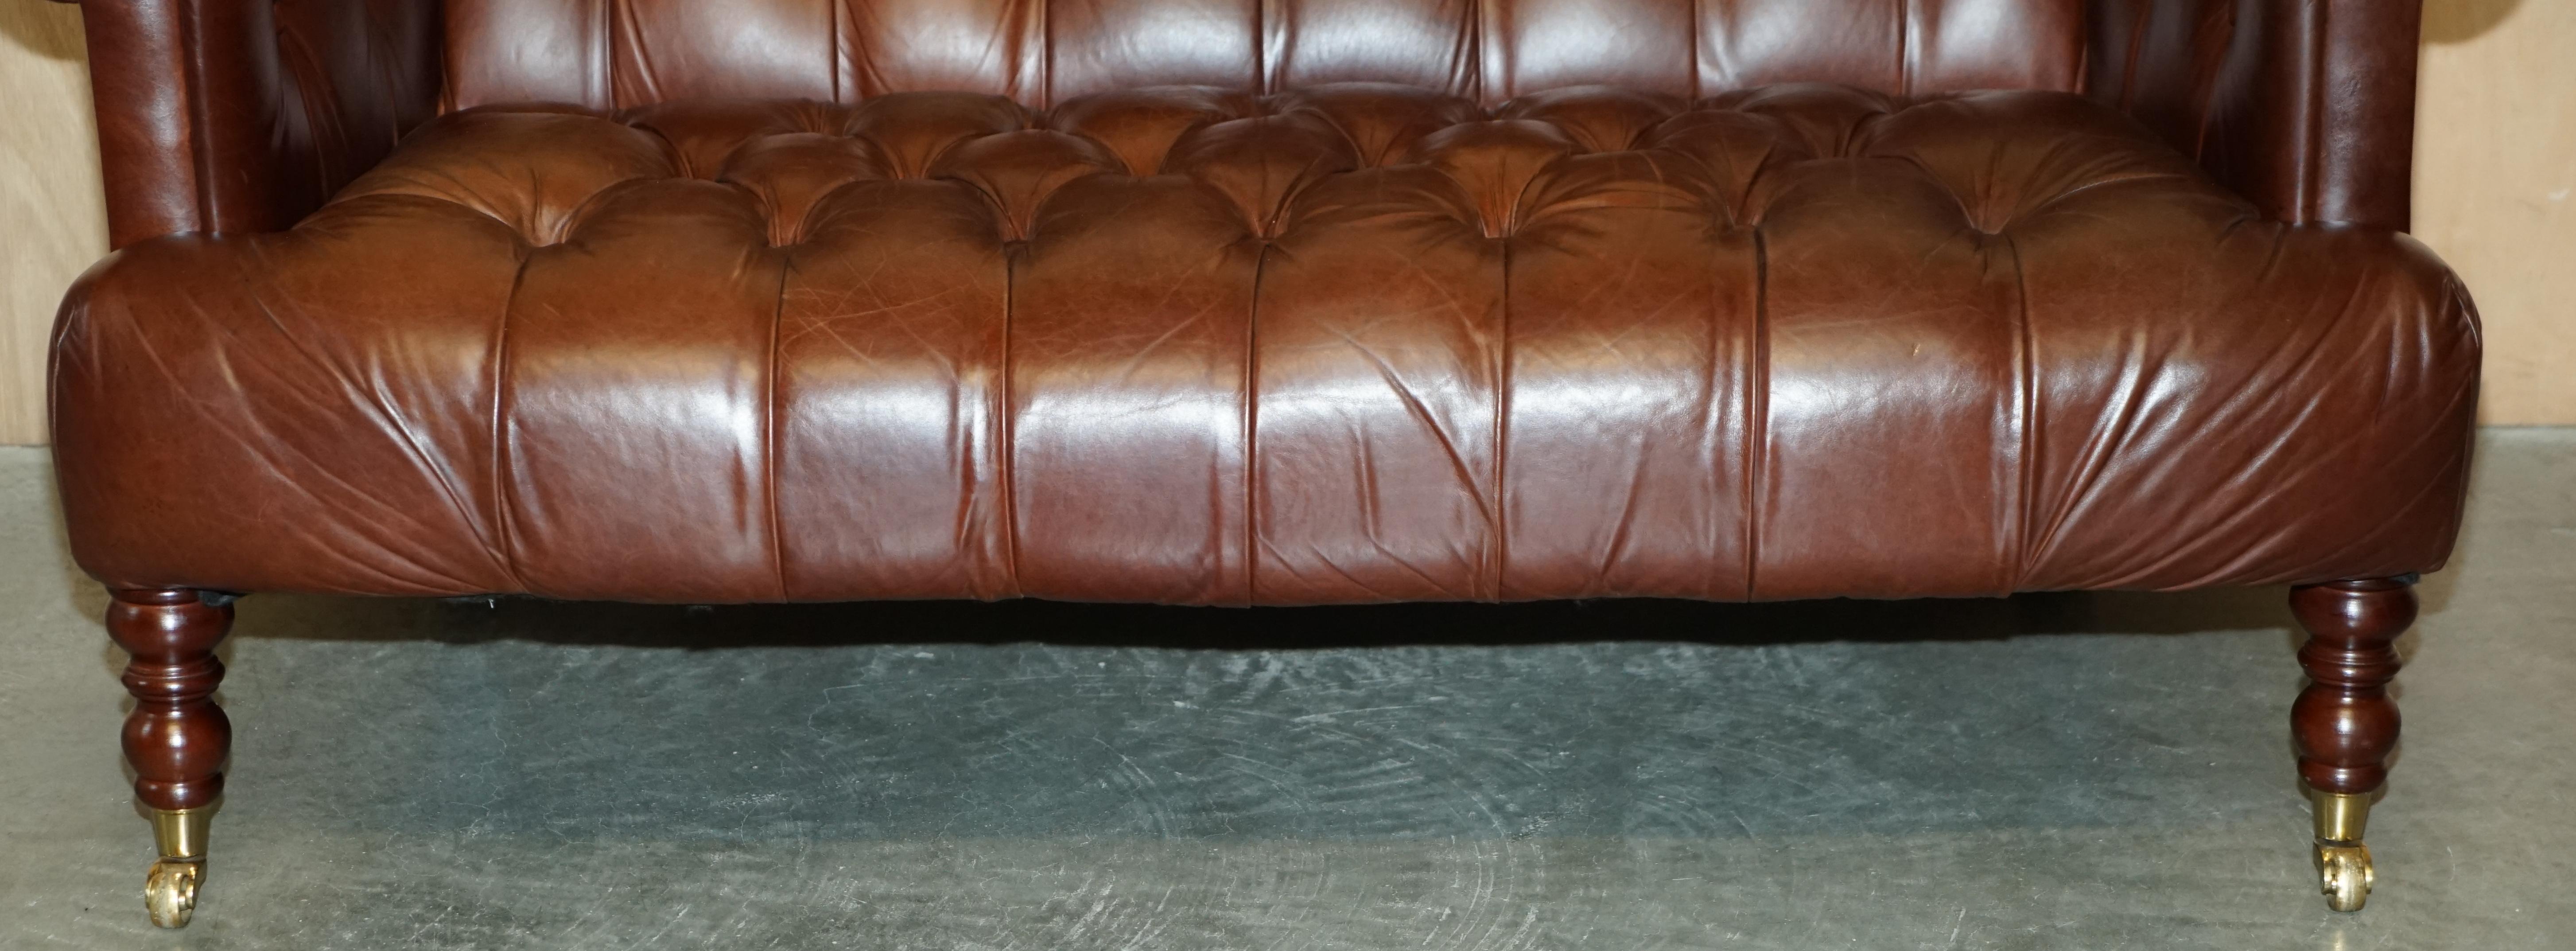 FiNE CHESTNUT BROWN LEATHER LAUREN ASHLEY CHESTERFIELD TWO SEAT LIBRARY SOFa im Angebot 3